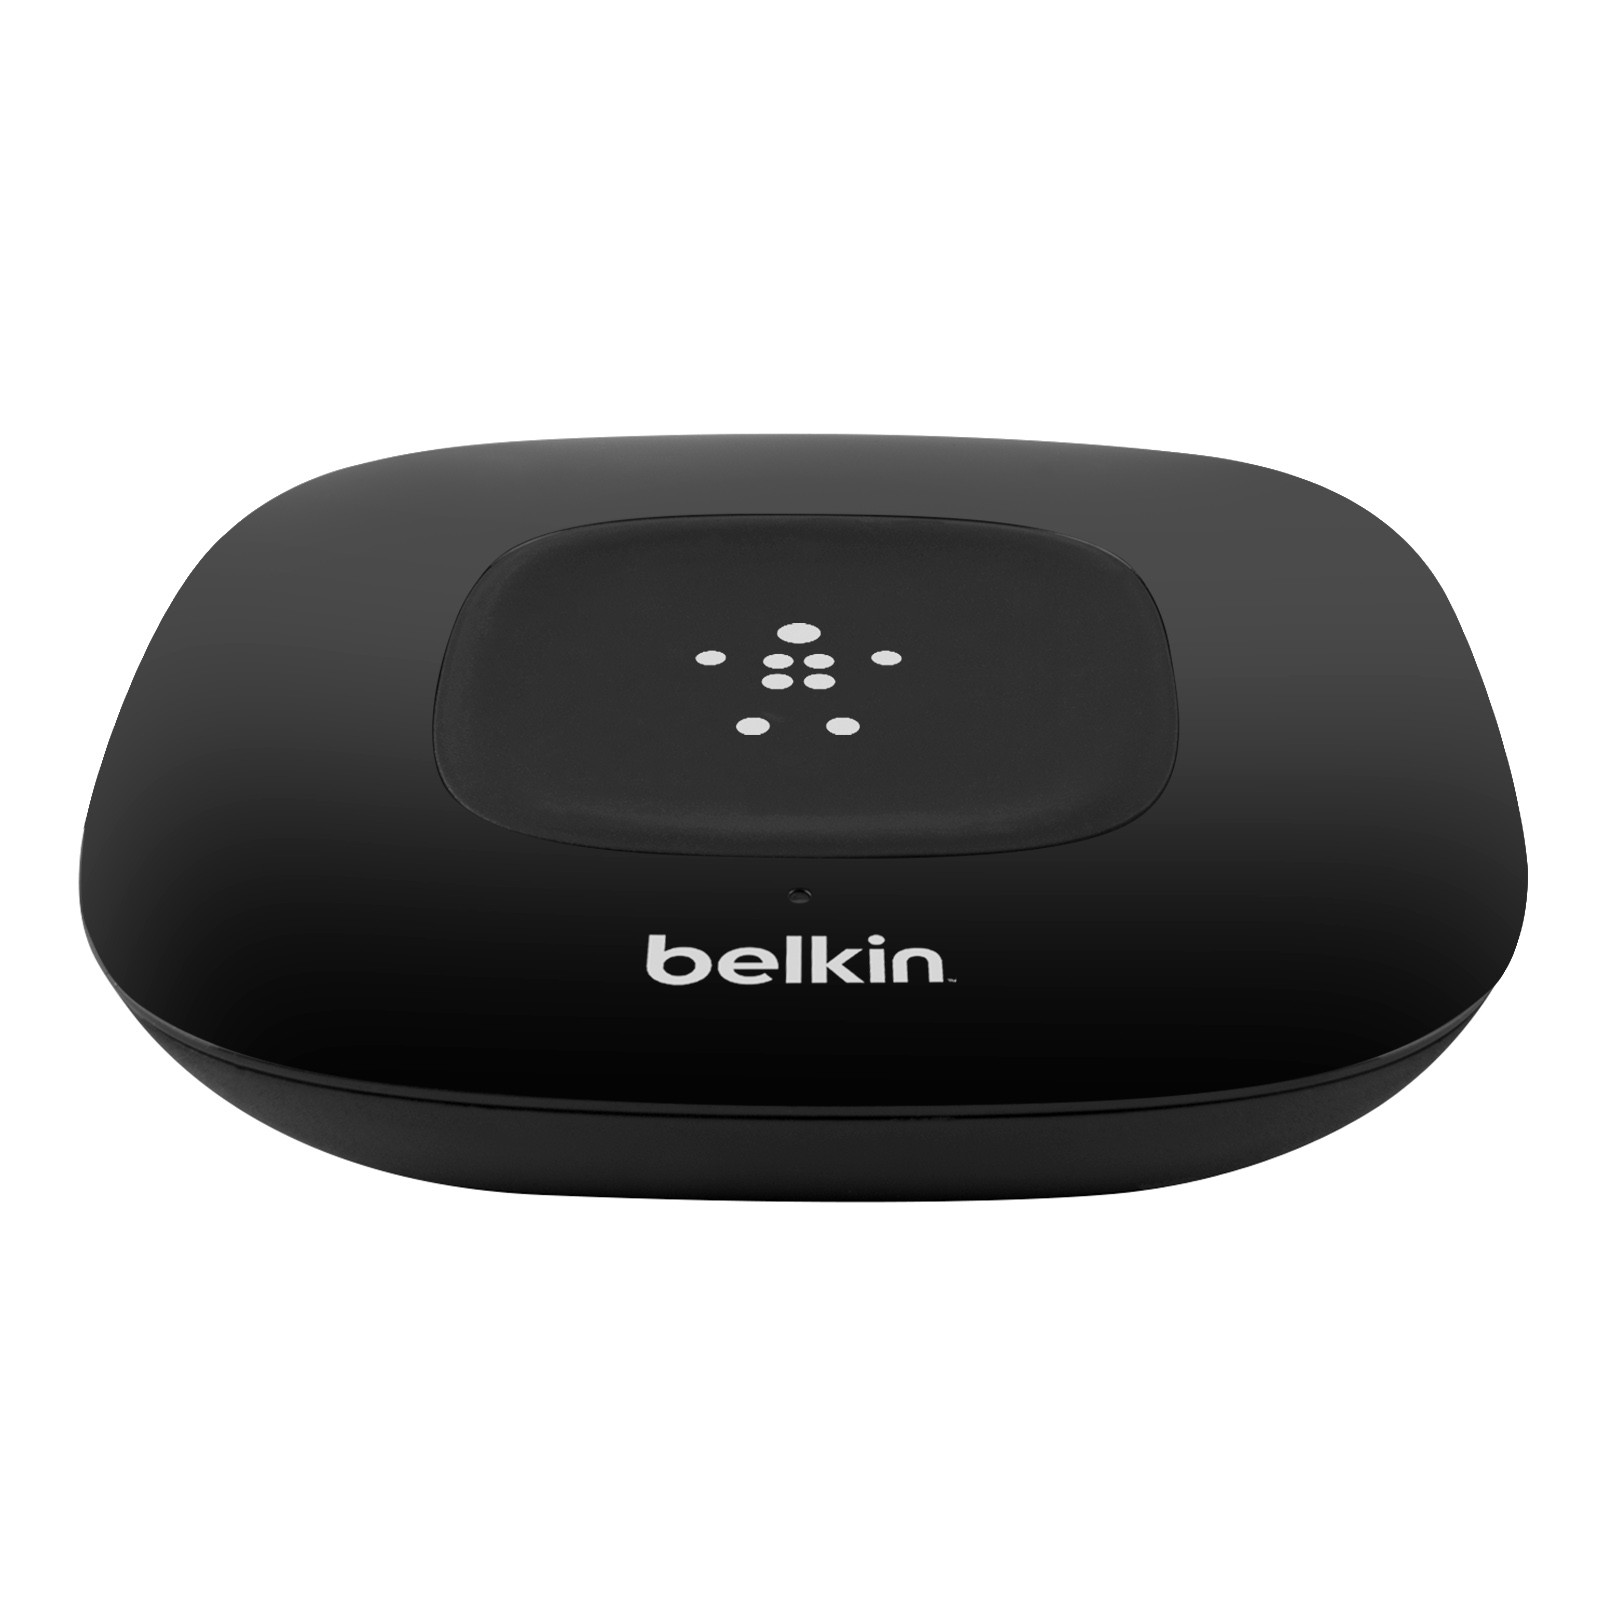 Belkin NFC enabled HD Bluetooth music receiver for $16 with code